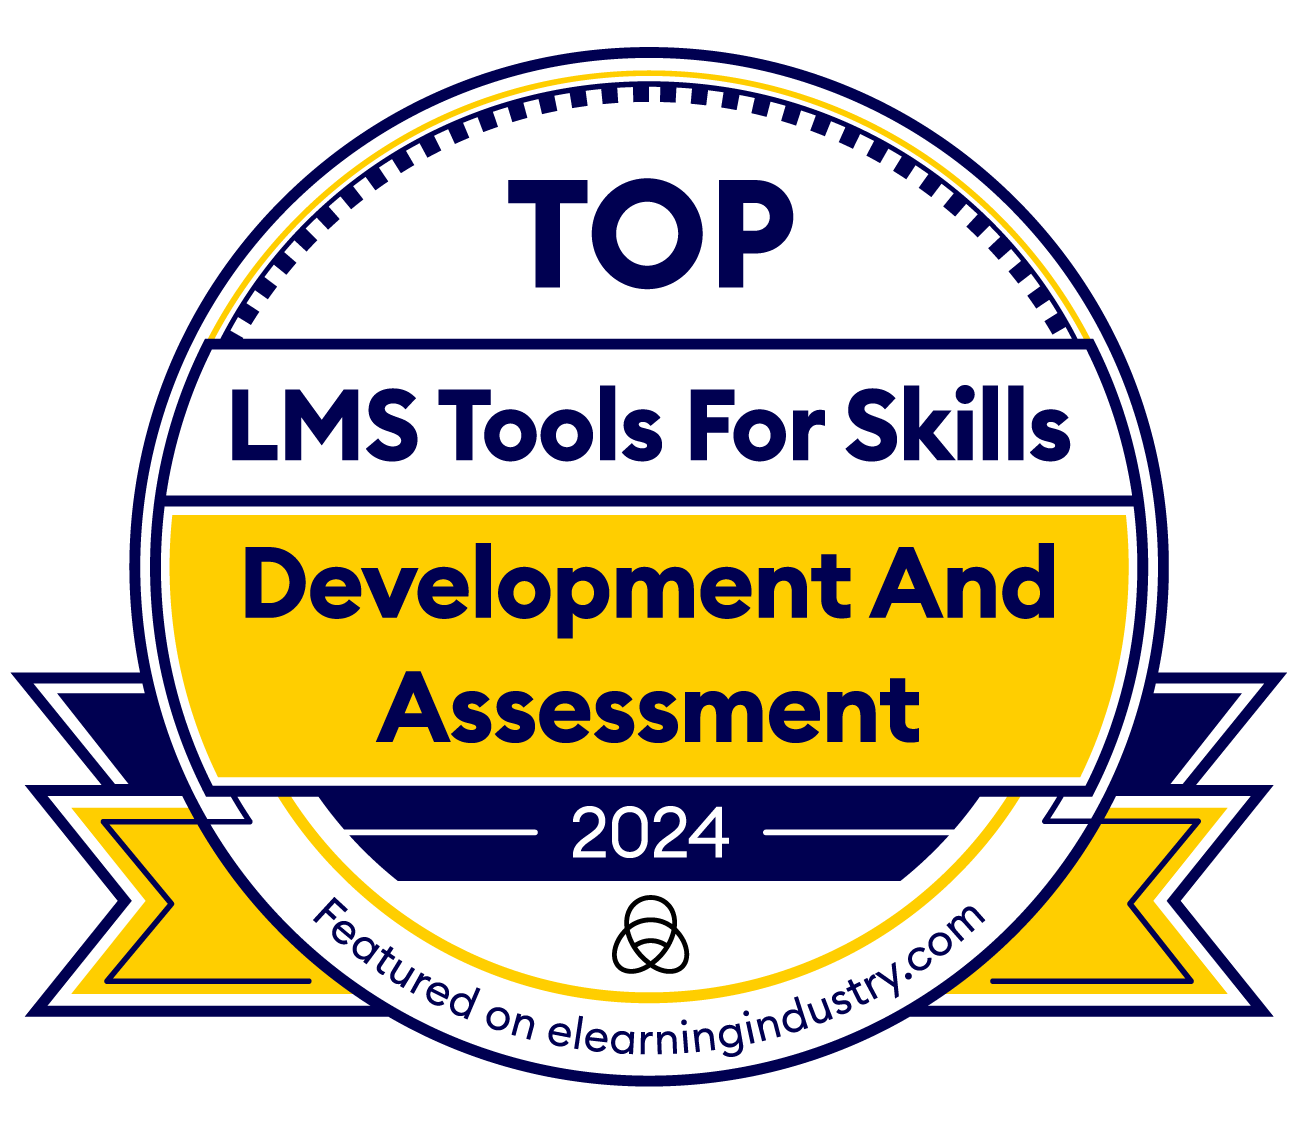 eLearning Industry - Top LMS Tools for Skills Development and Assessment